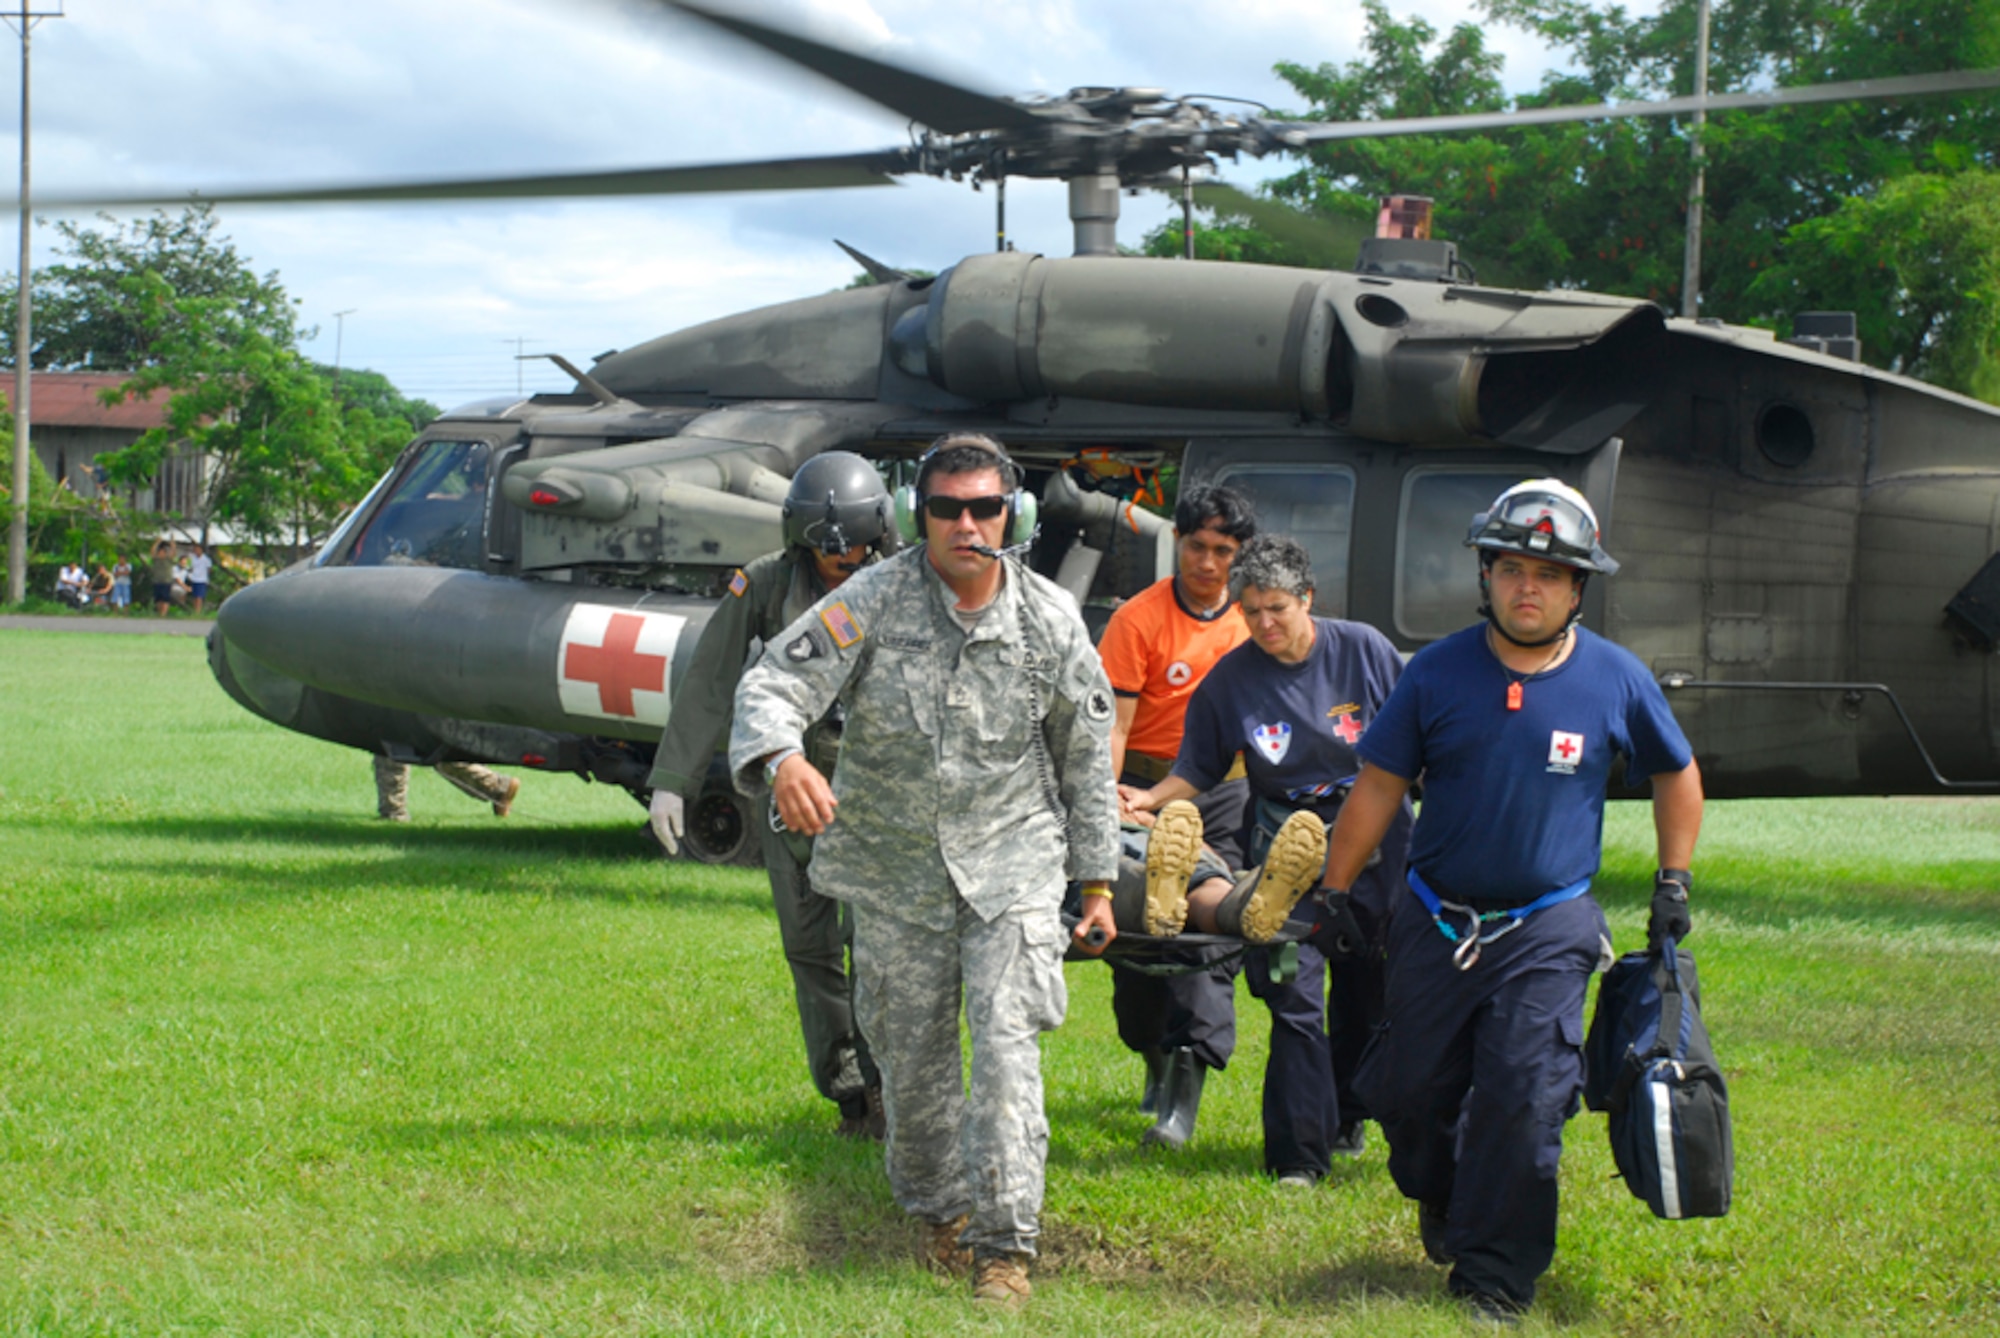 Army Staff Sgt. Jose Gutierrez and Specialist Robert Hunt carry an injured man from a medivac helicopter Dec. 1. More than 60 JTF-Bravo personnel participated in humanitarian disaster relief missions in Costa Rica and Panama. (U.S. Air Force photo by Staff Sgt. Joel Mease)